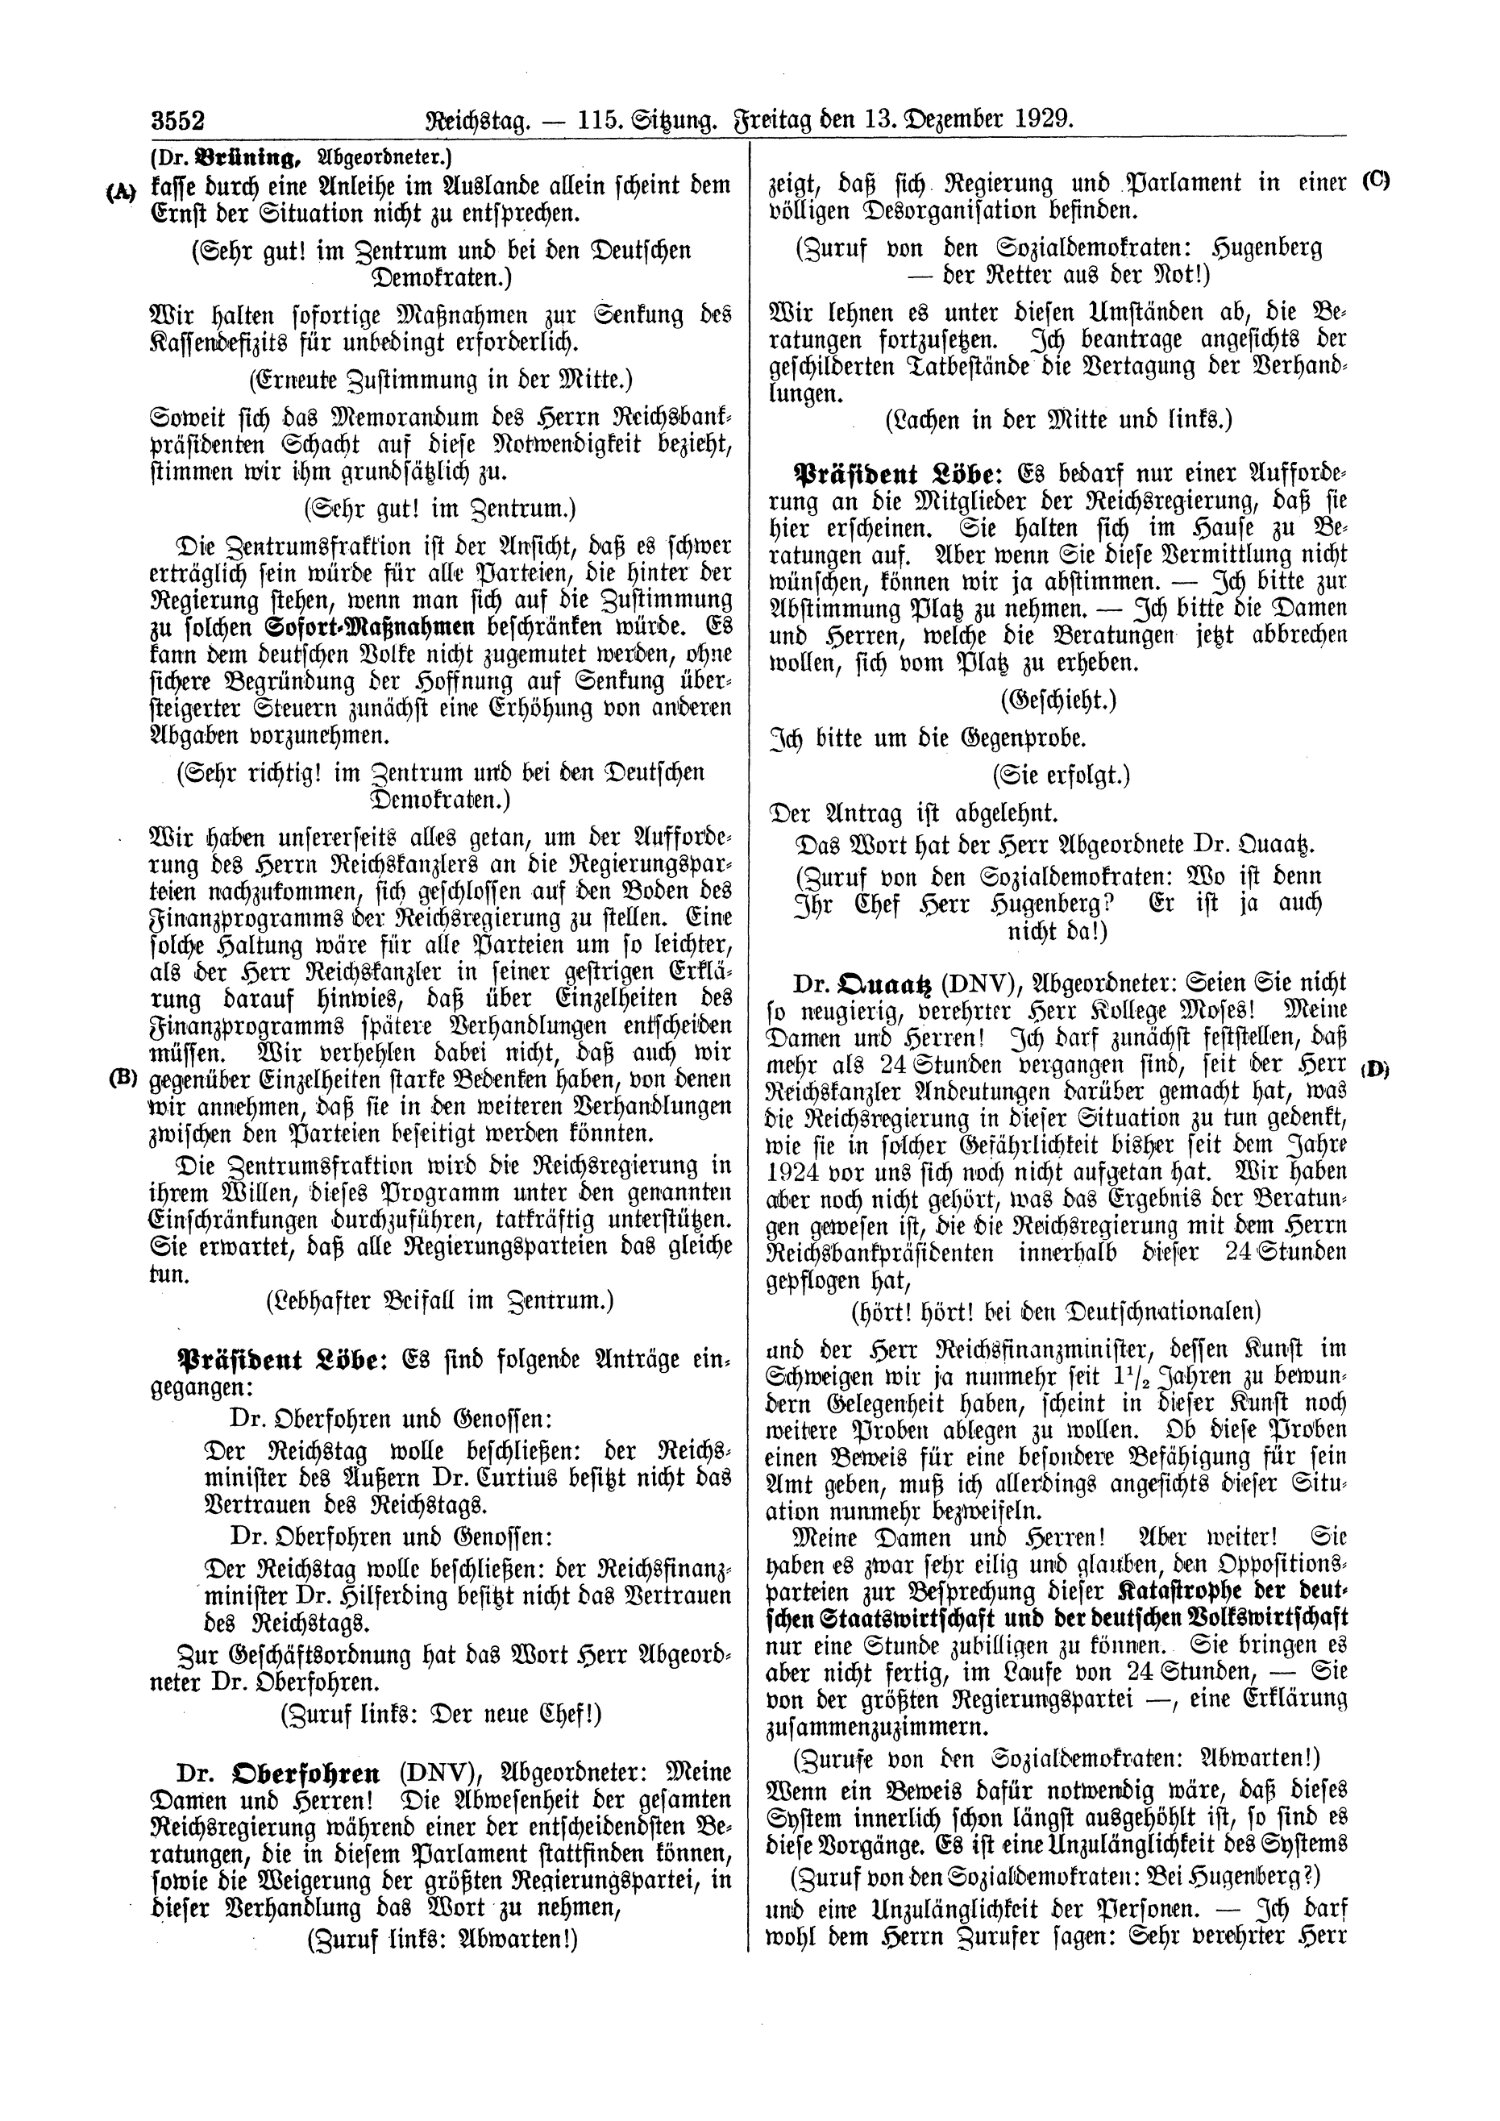 Scan of page 3552